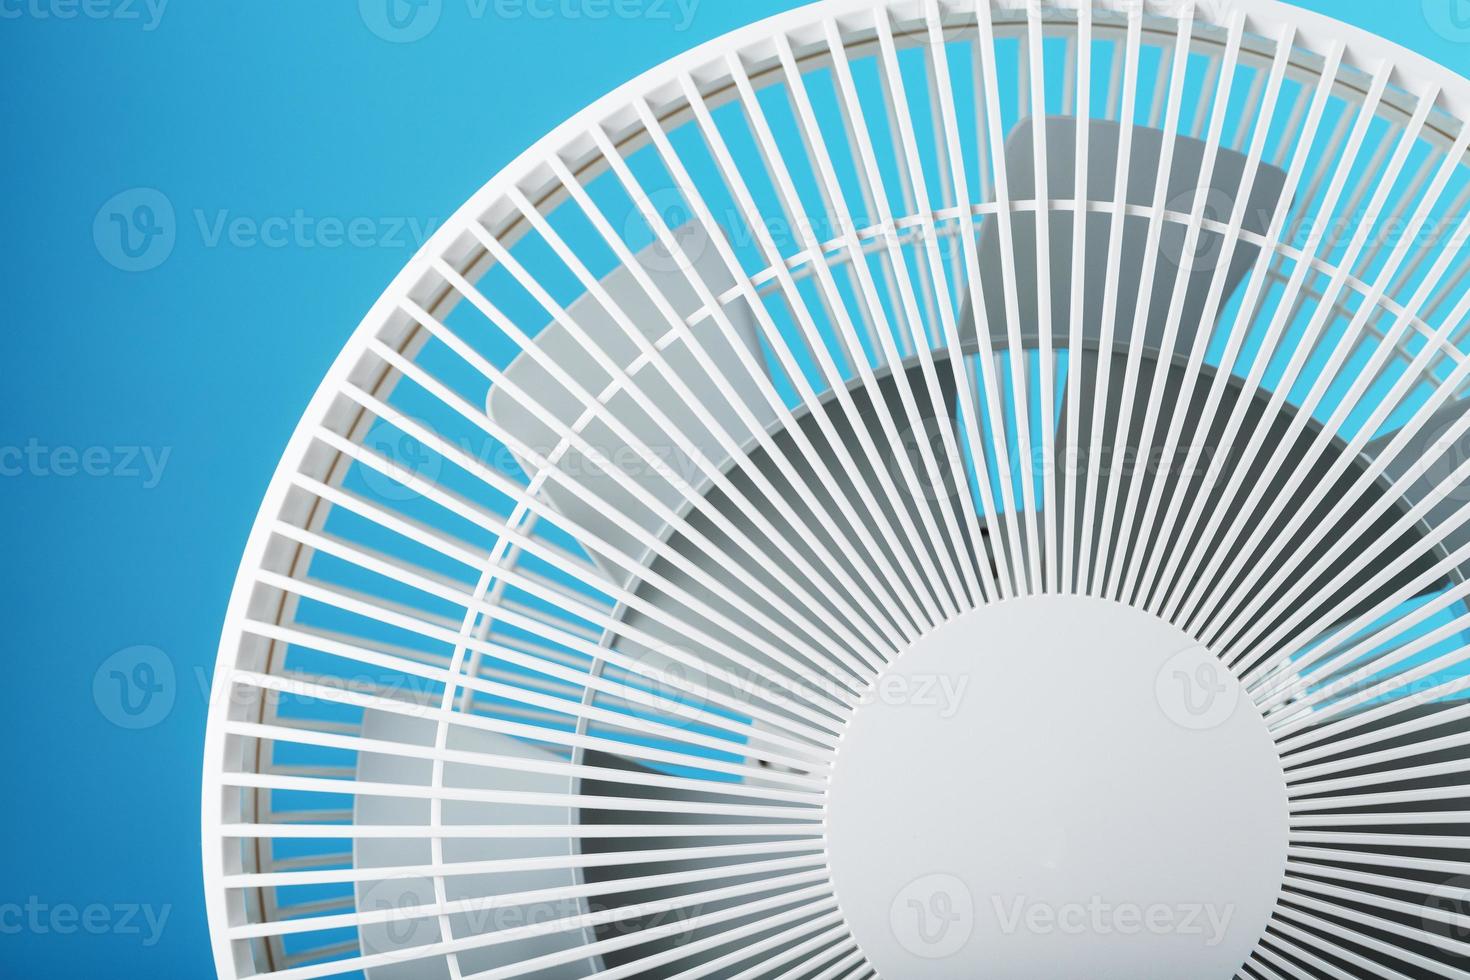 The grille and blades of the electric fan are white on a blue background photo